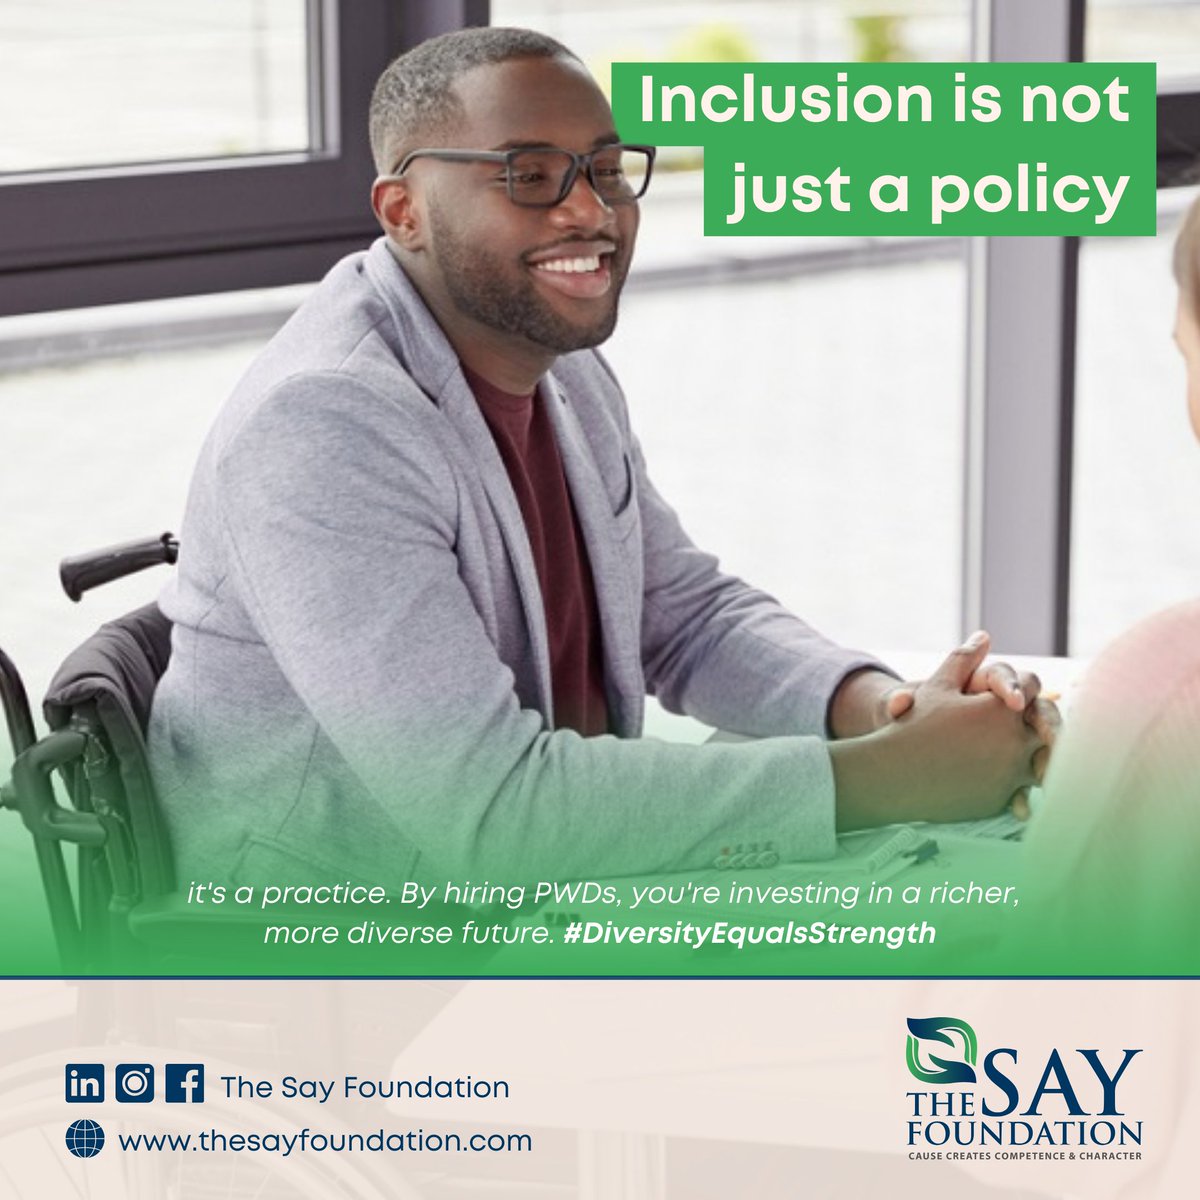 Empower, engage, and elevate! Join us in our mission to create workplaces where everyone thrives.
Learn more about how you can contribute to an inclusive future at thesayfoundation.com

 #inclusionmatters #diversityandinclusion #hirediversity #empowerment #workplaceequality